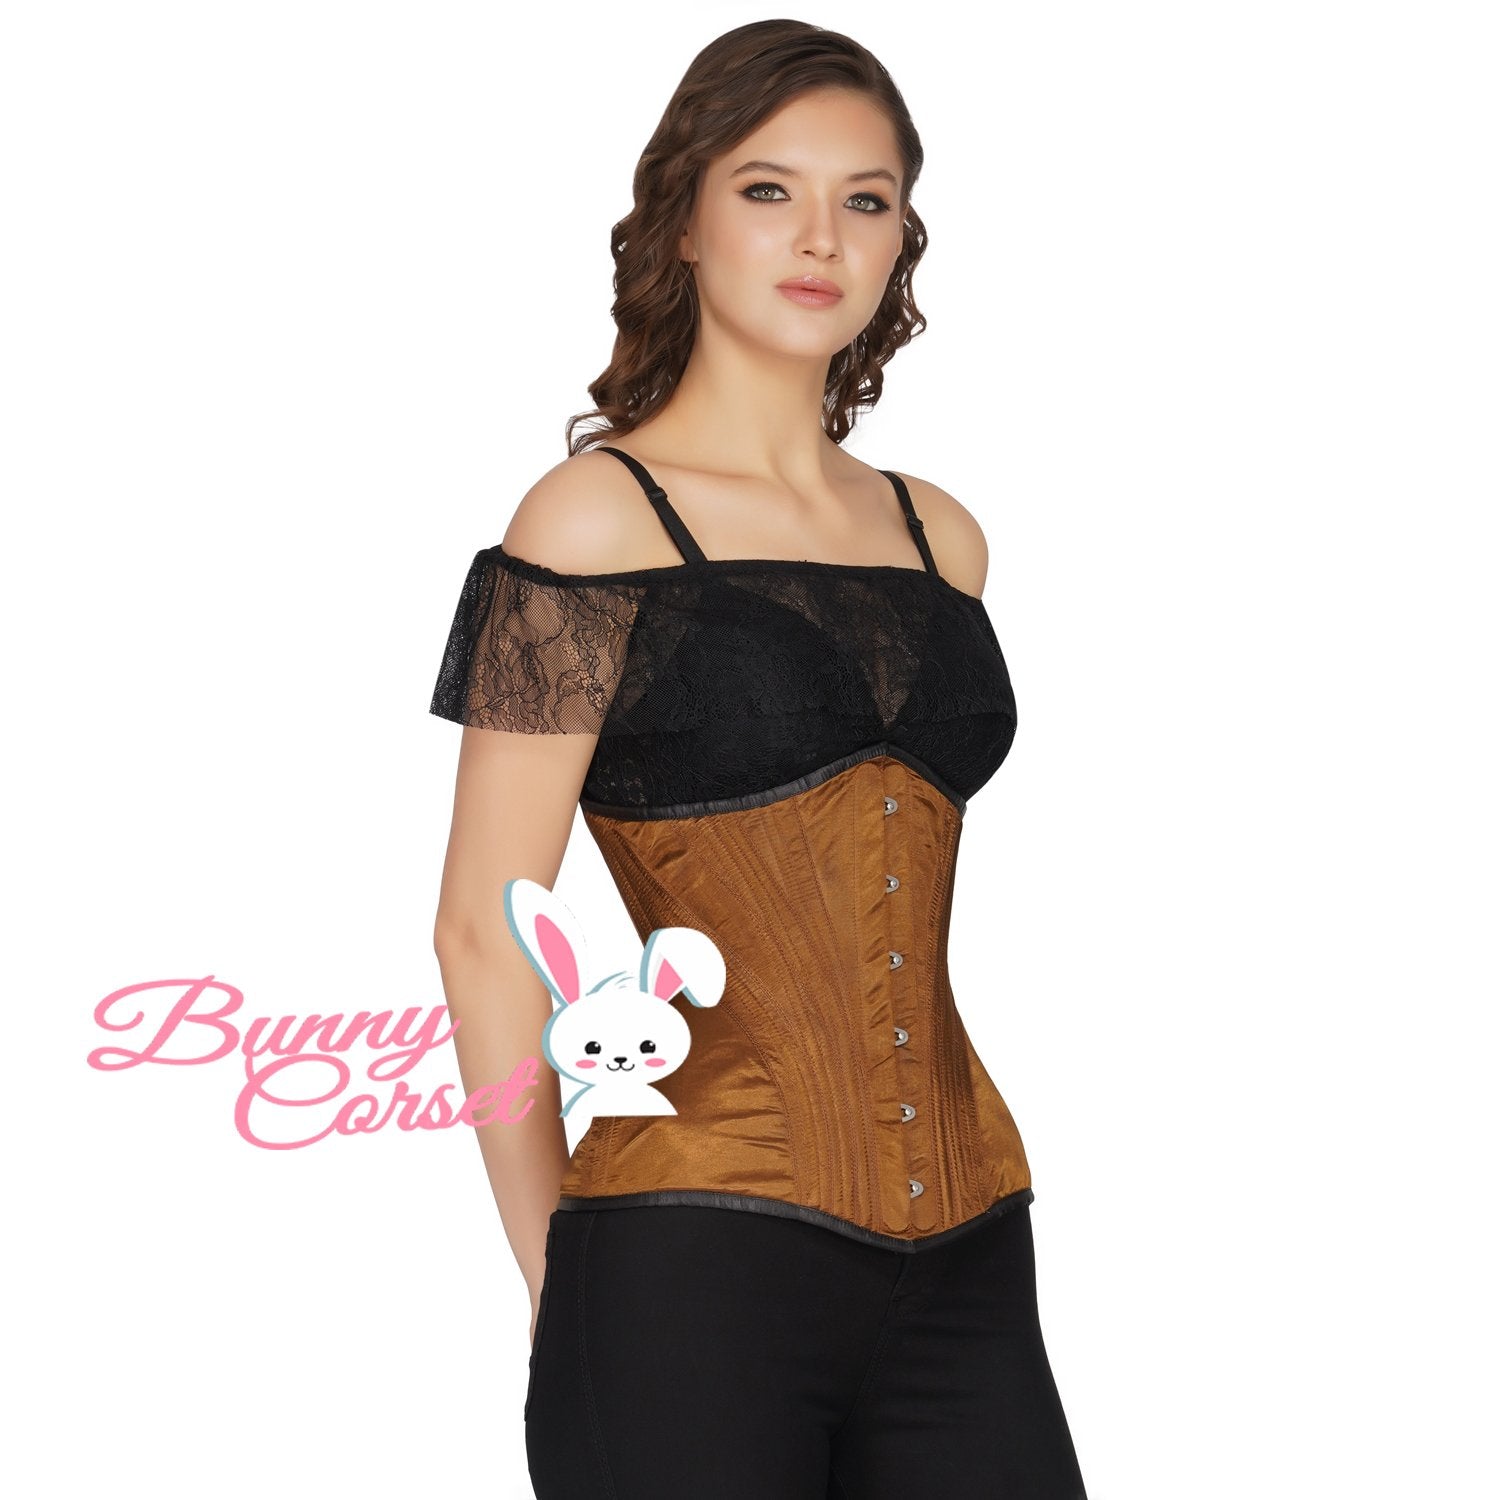 Why is Waist Training in a Fashion Corset, not a Great Idea? – Bunny Corset